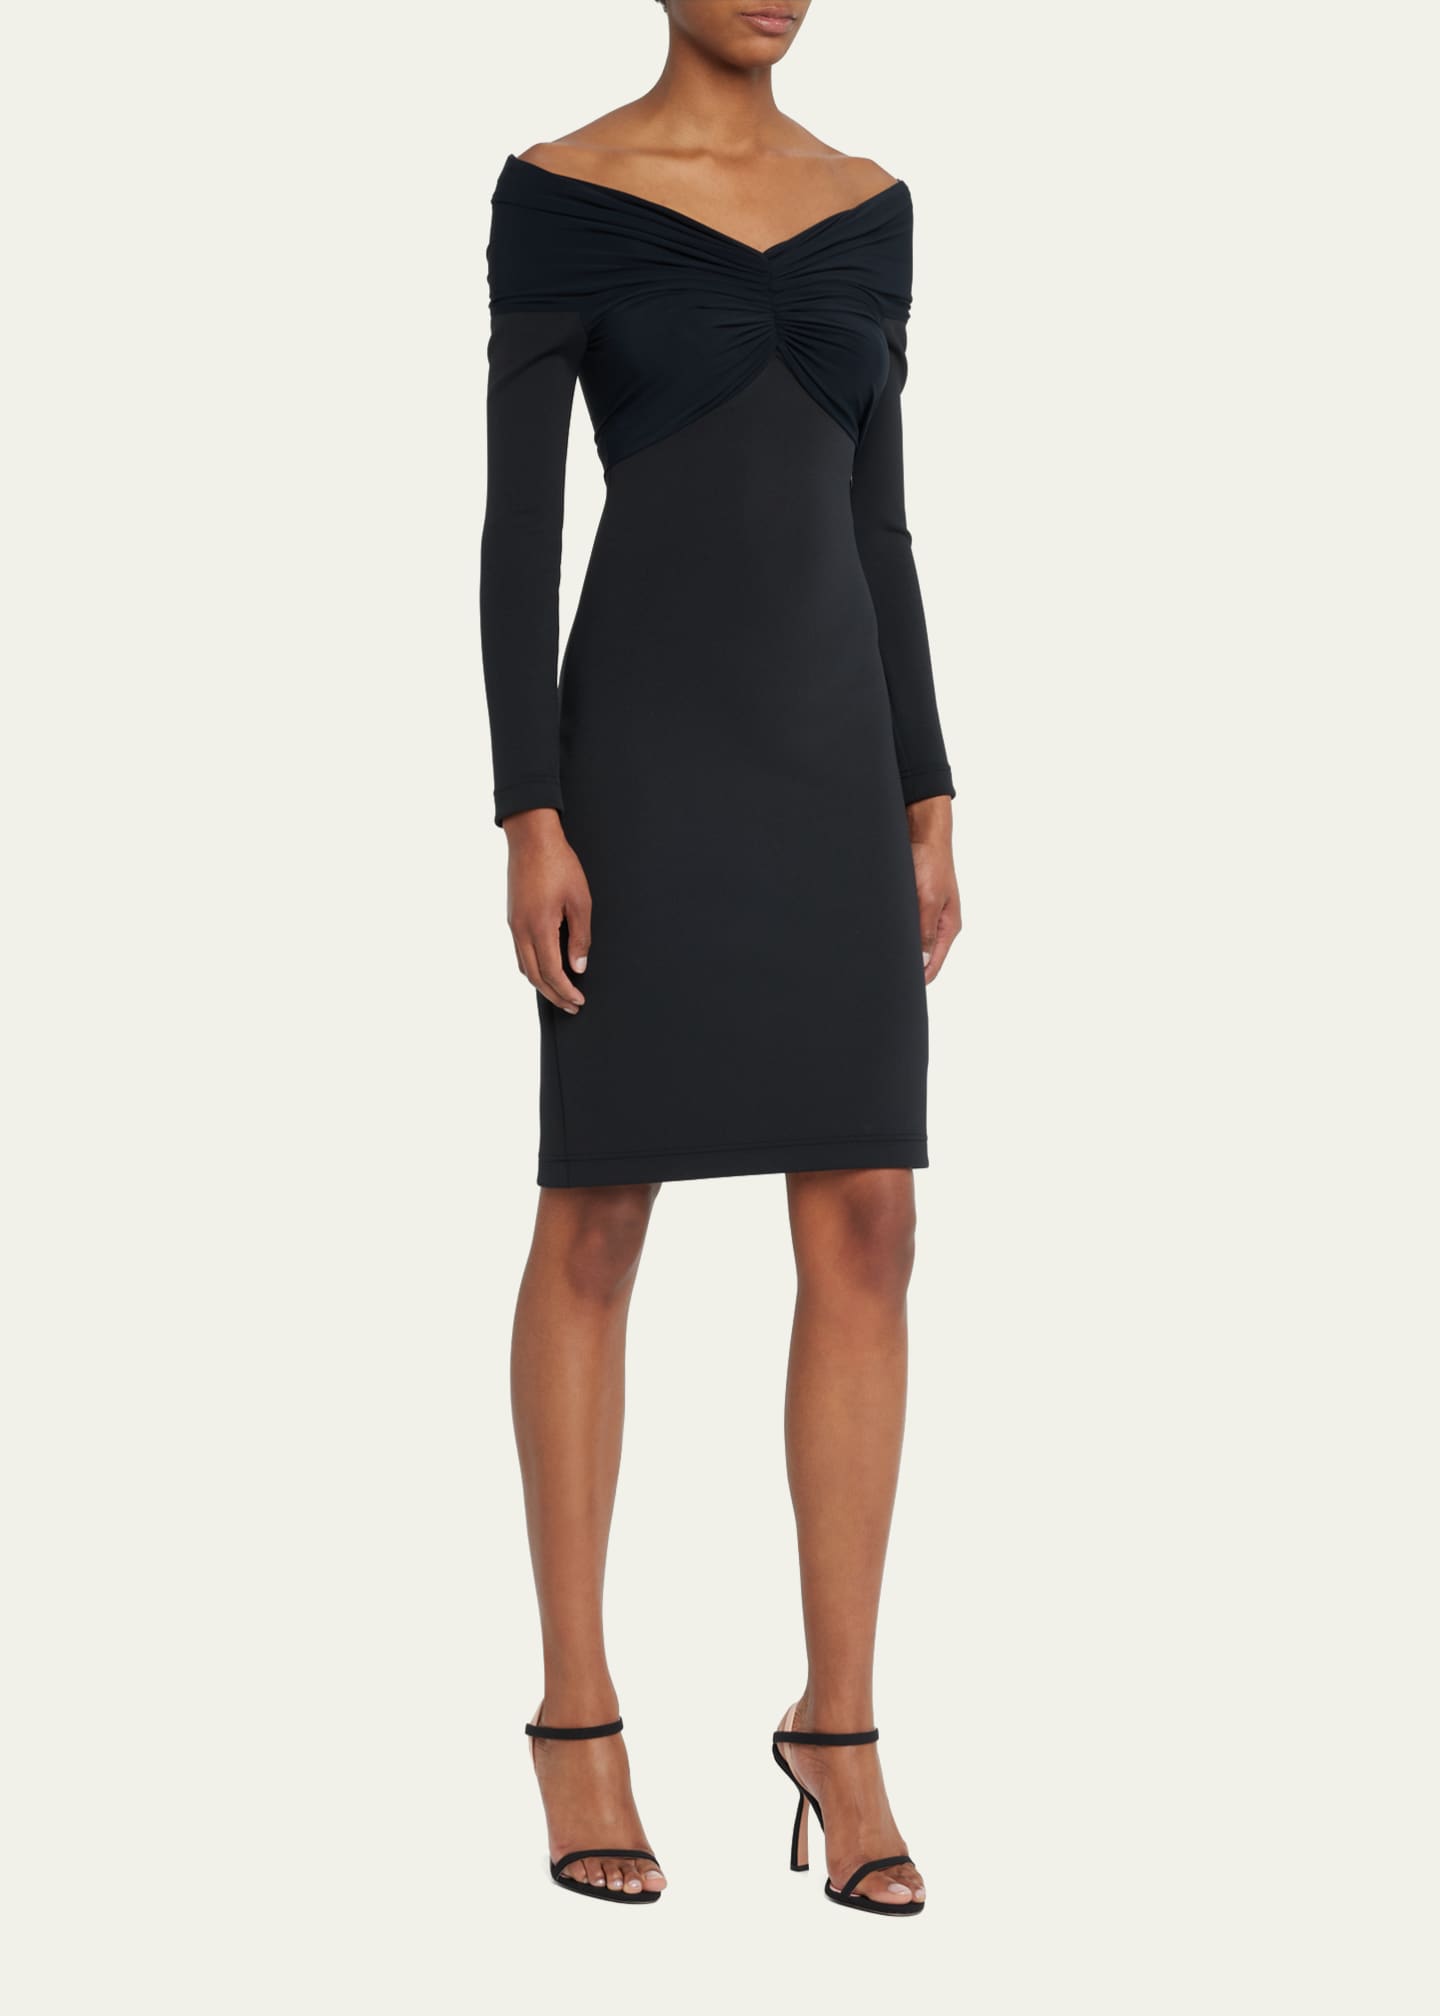 Burberry Off-Shoulder Short Dress with Ruched Front - Bergdorf Goodman